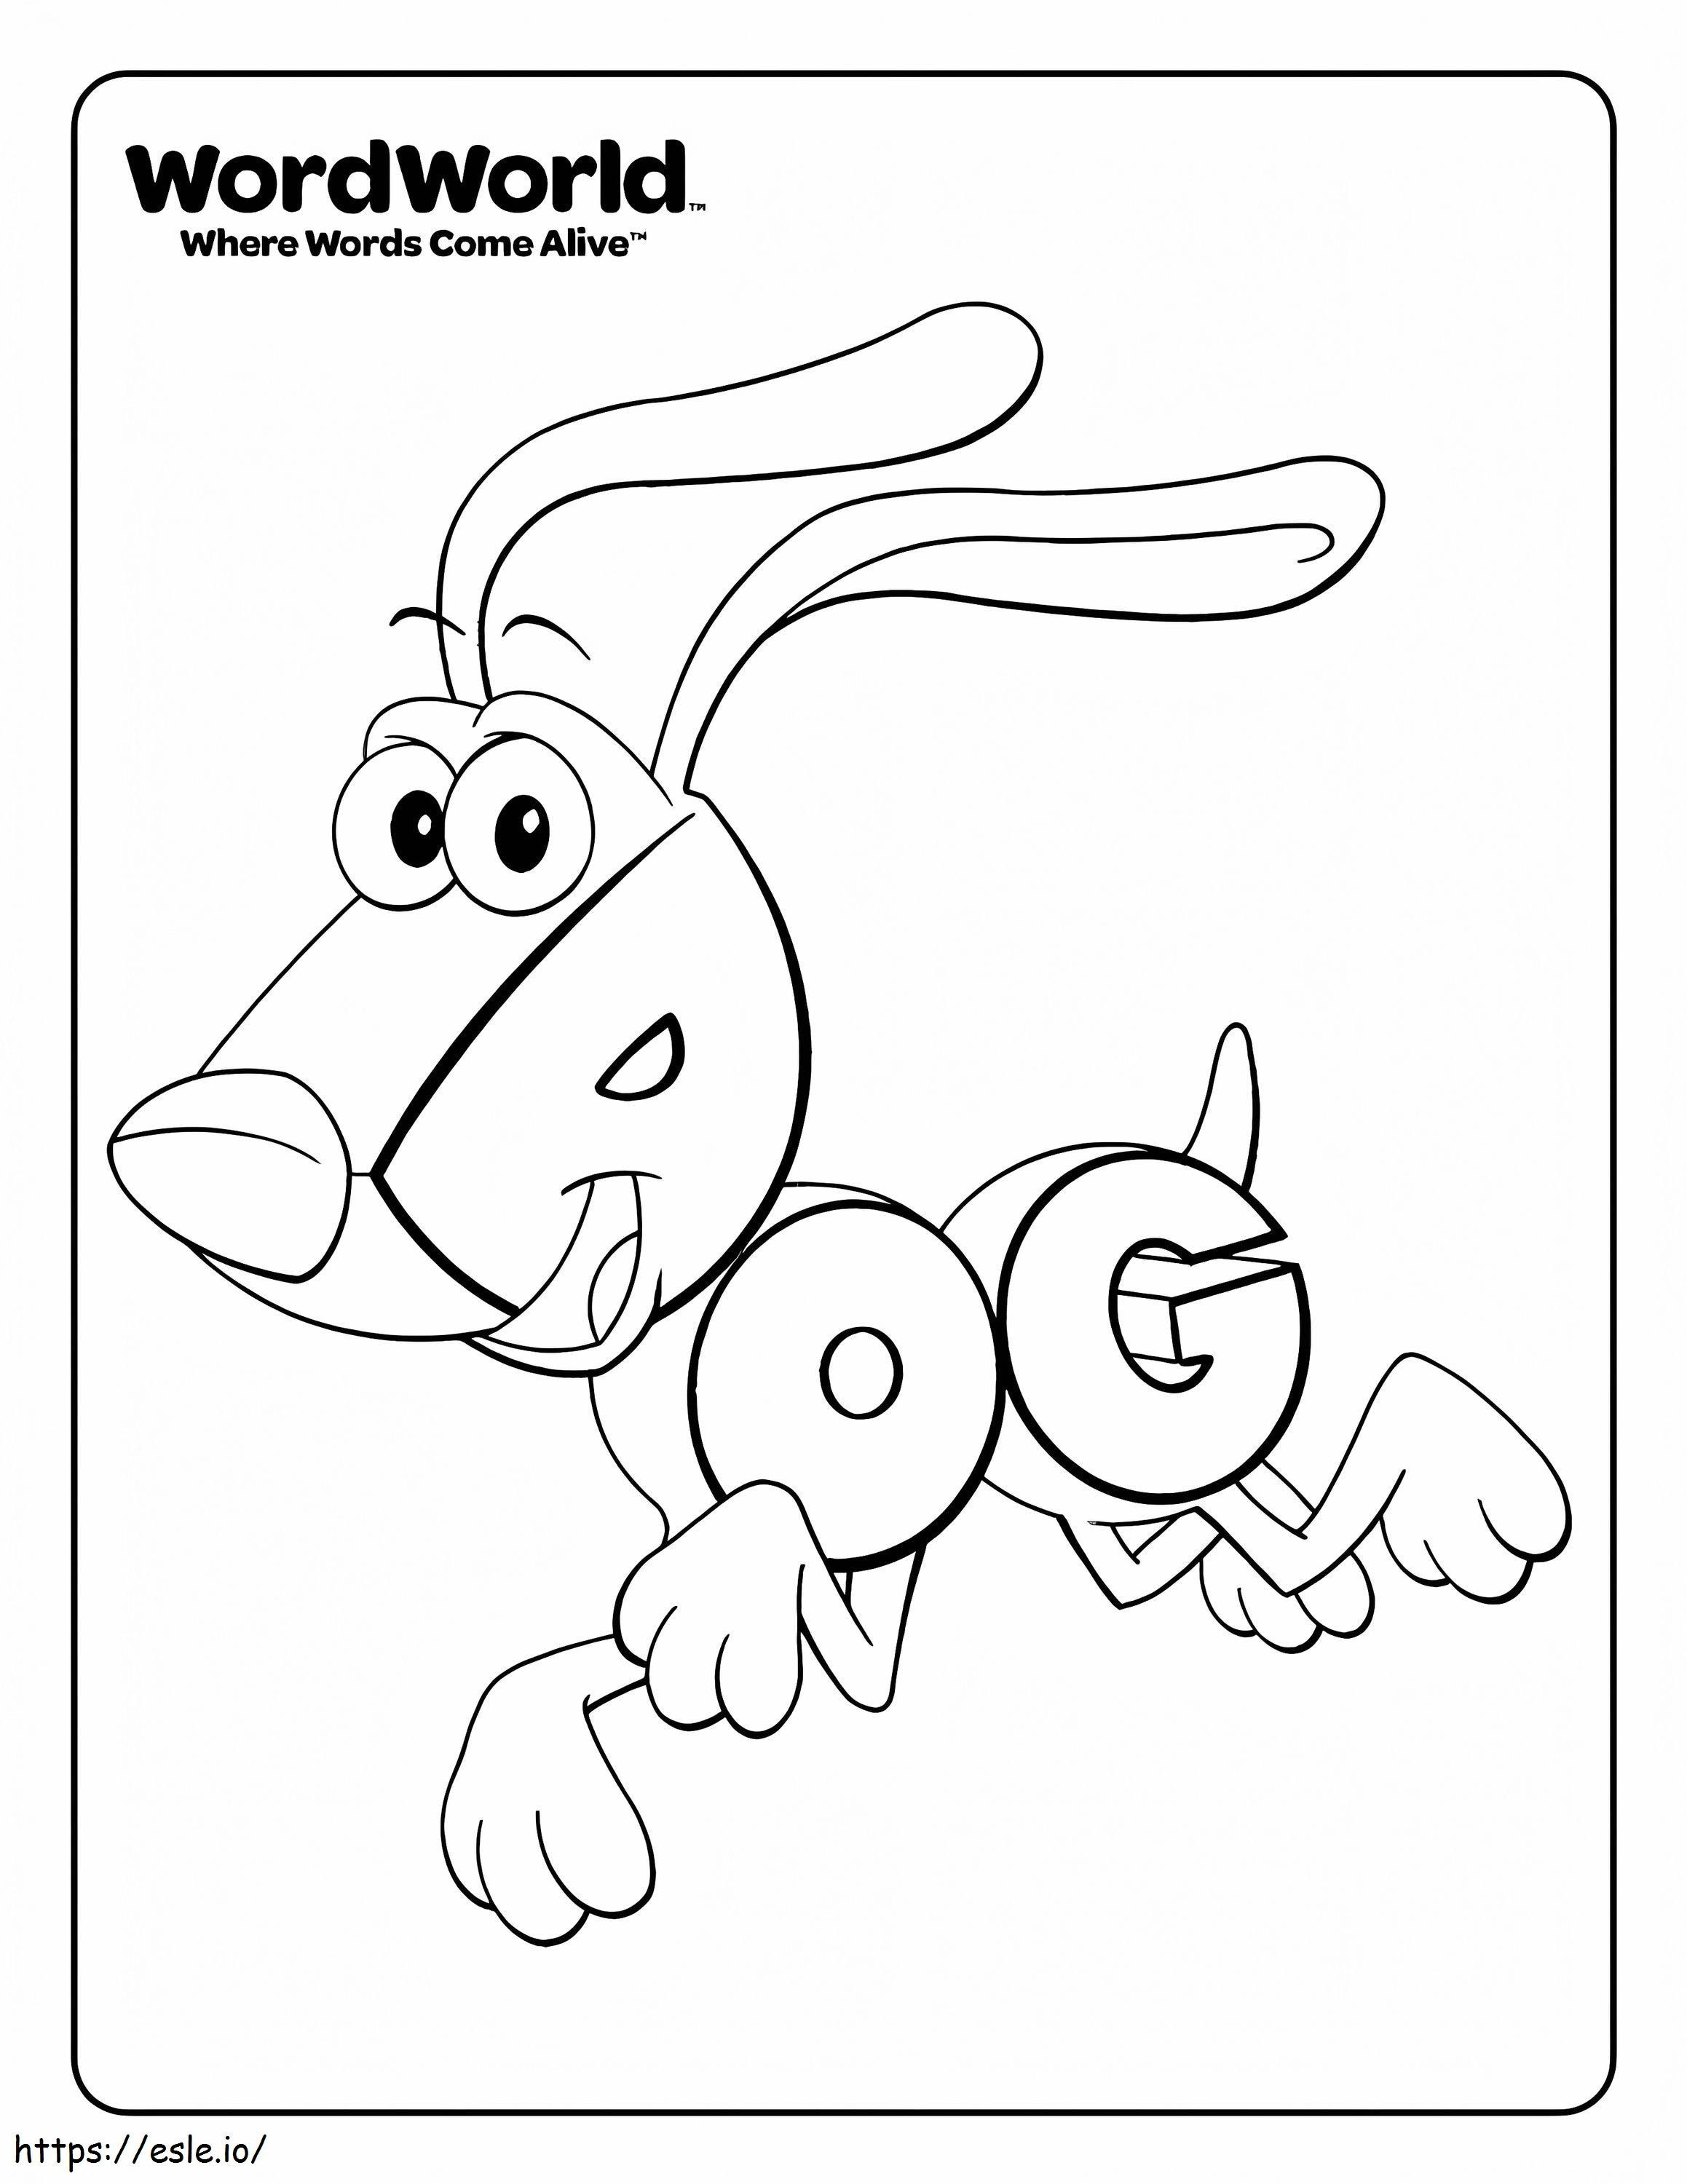 Dog WordWorld Coloring Page coloring page